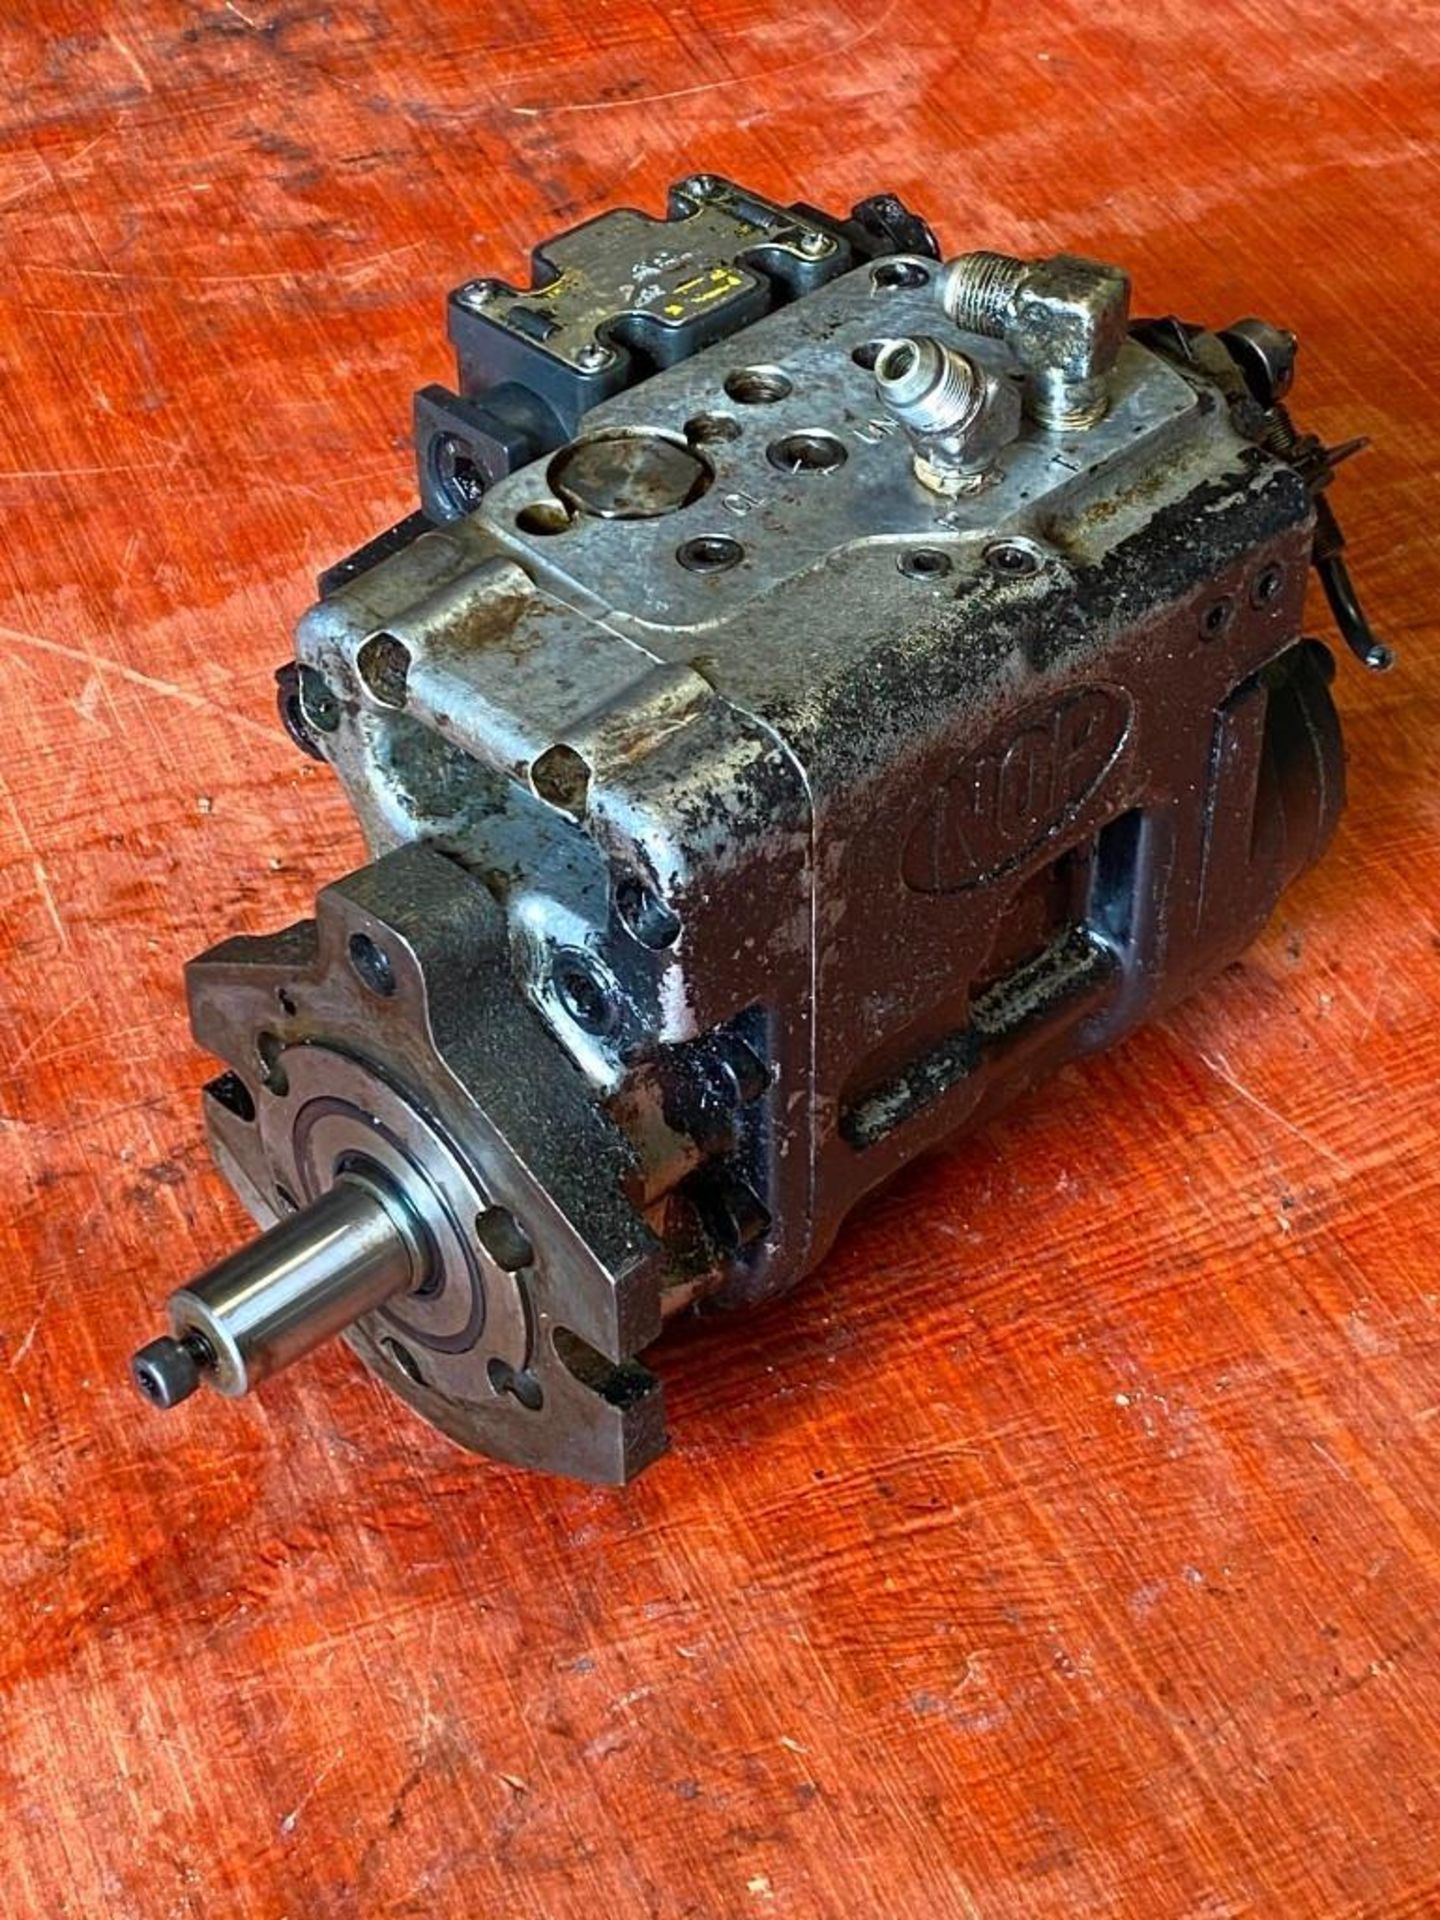 Nippon Gerotor #IS-100-2PM-1AH0-HB-53 Index Motor Assy w/ Valve - Image 2 of 6